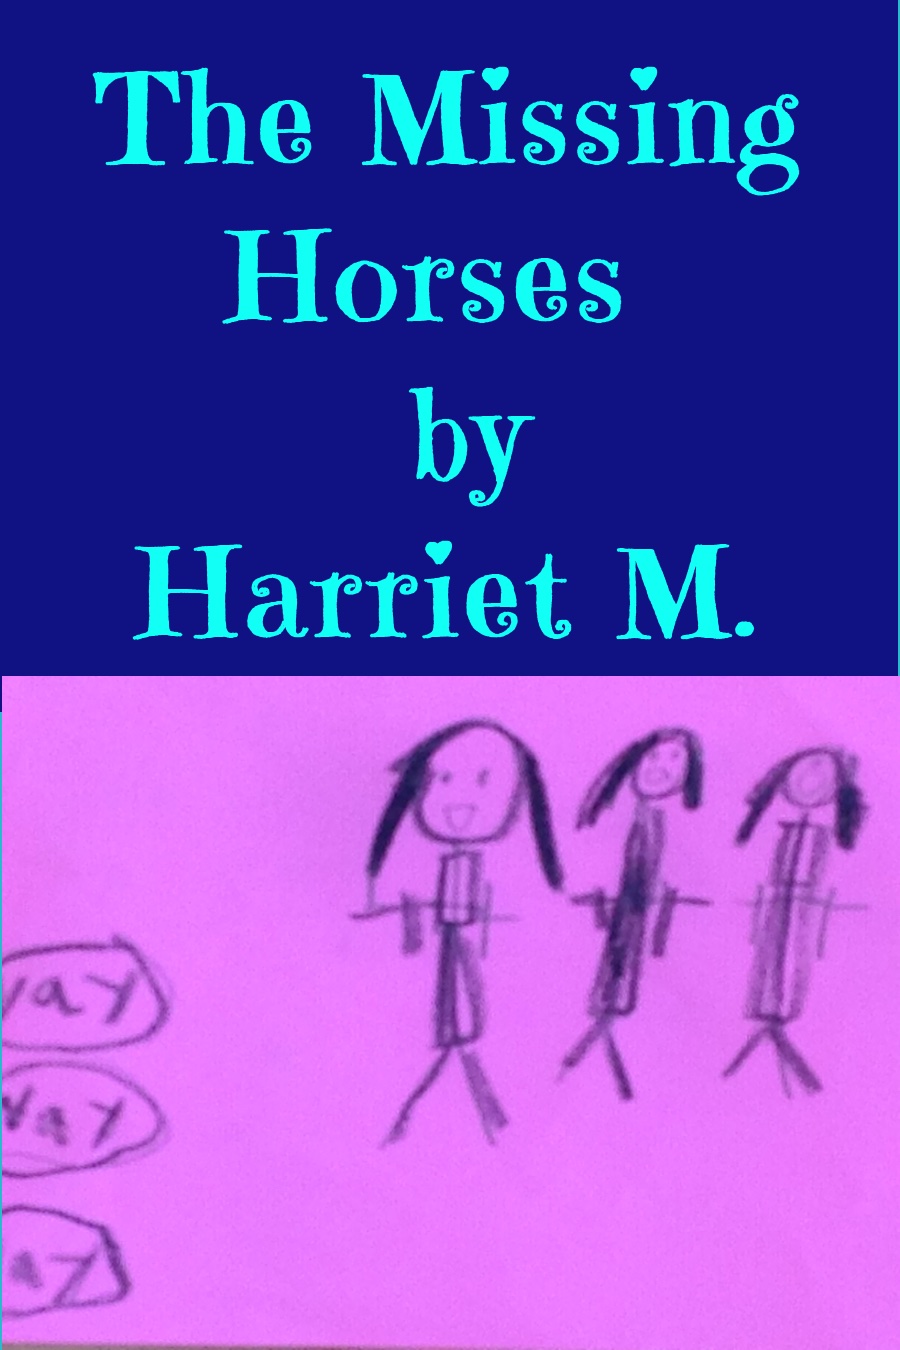 The Missing Horses by Harriet M